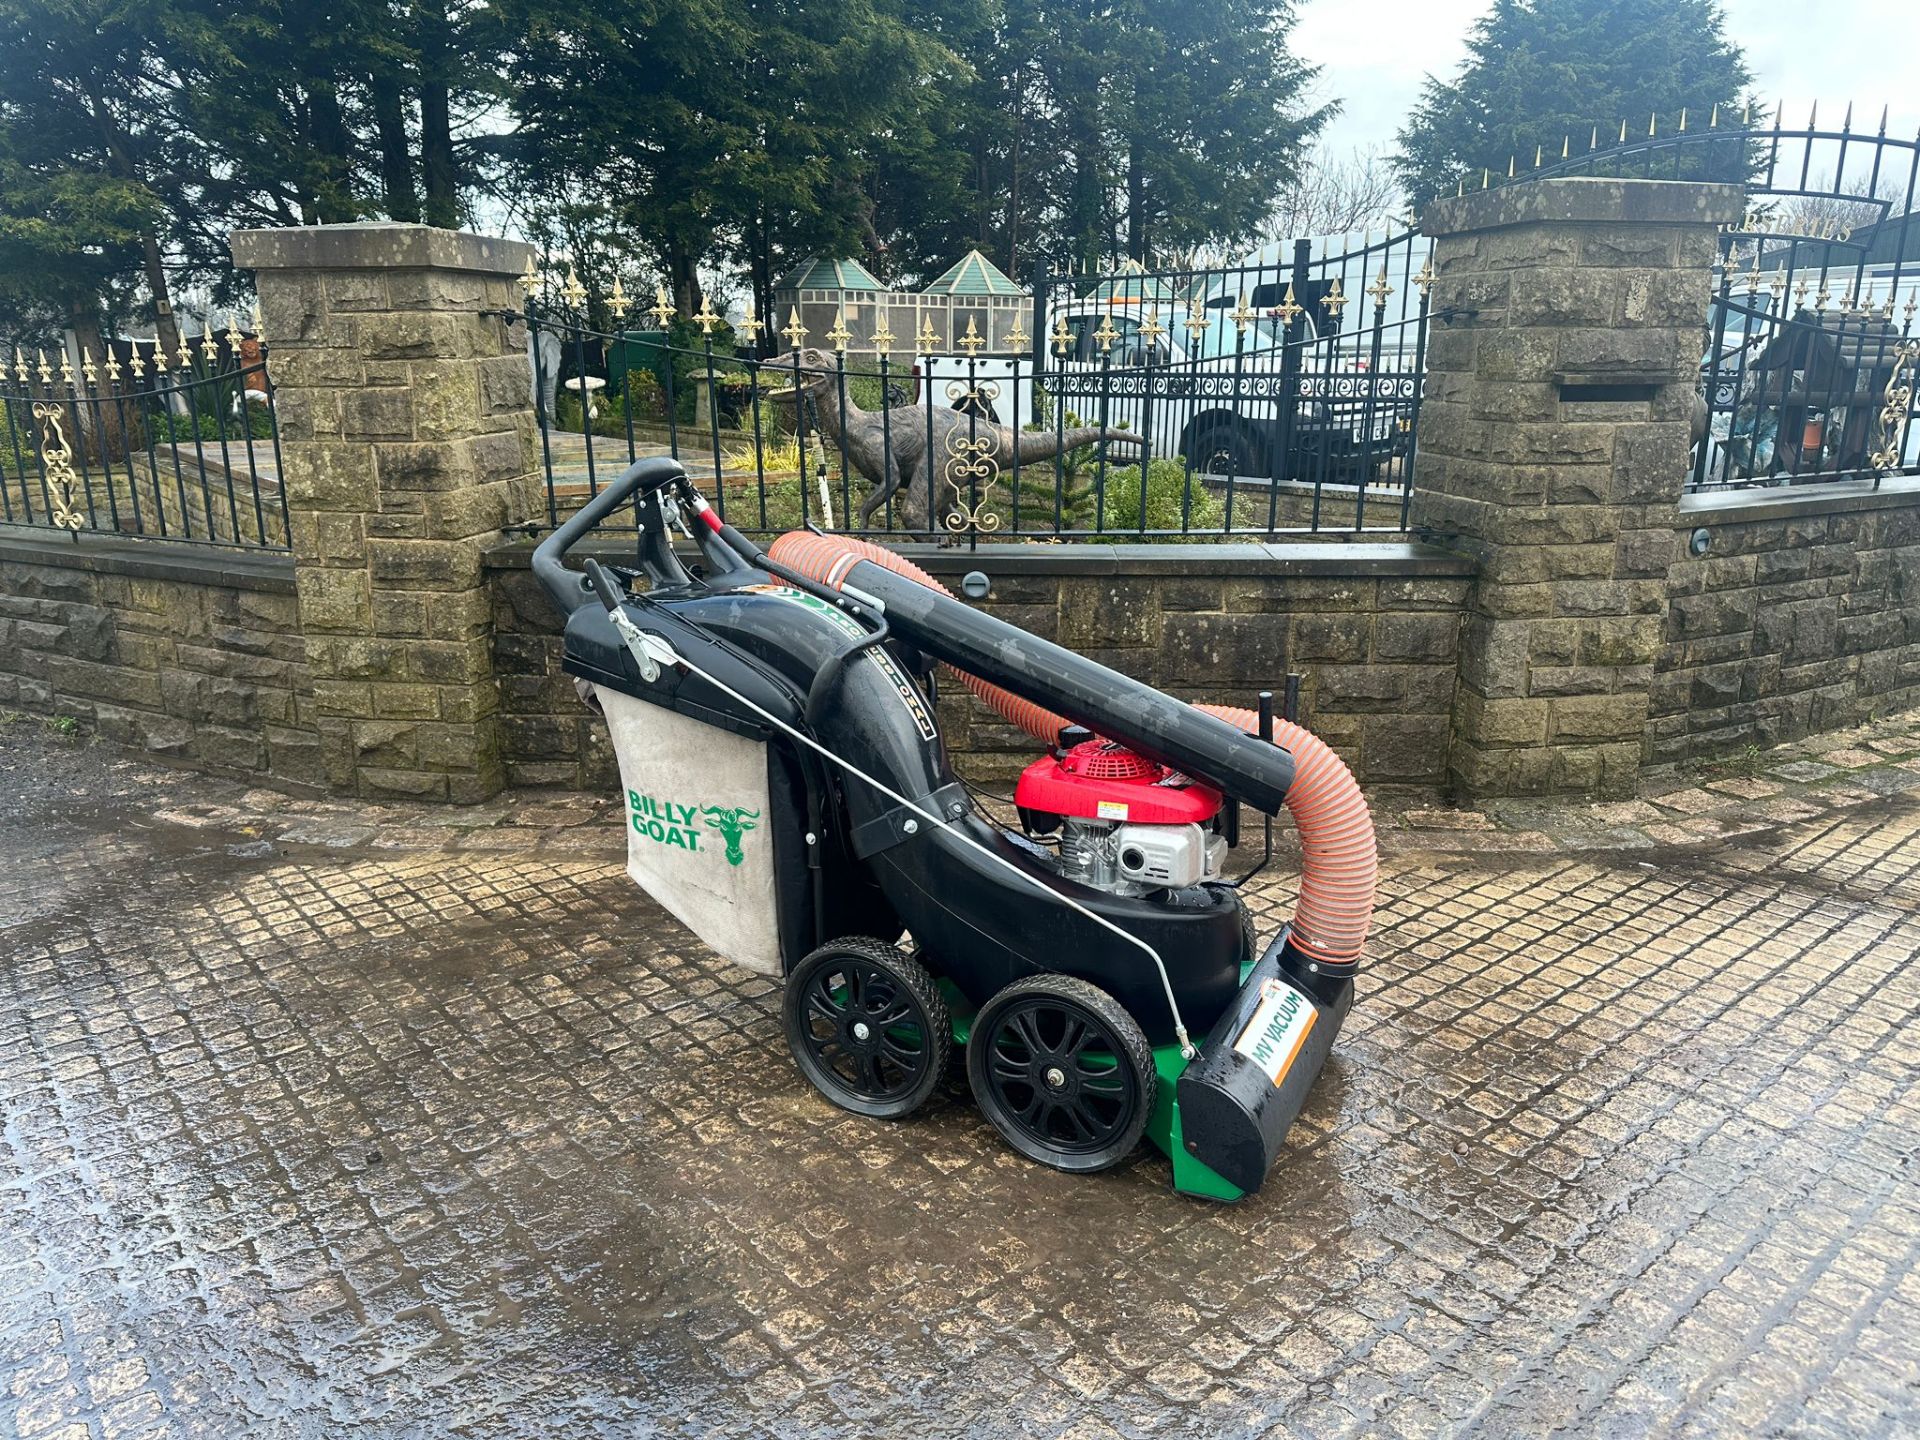 2019 BILLY GOAT MV650SPH 29Ó SELF PROPELLED GARDEN VACCUM COLLECTOR WITH WANDER WAND *PLUS VAT*